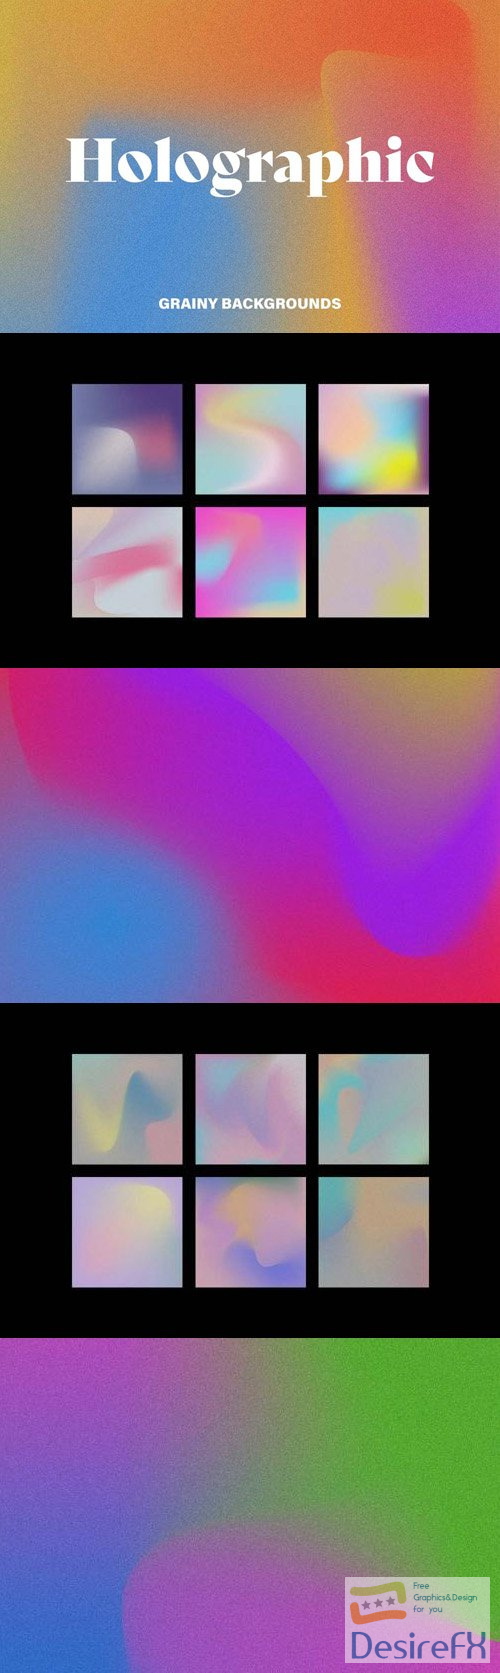 Holographic - 15 Grainy Backgrounds Vector Templates